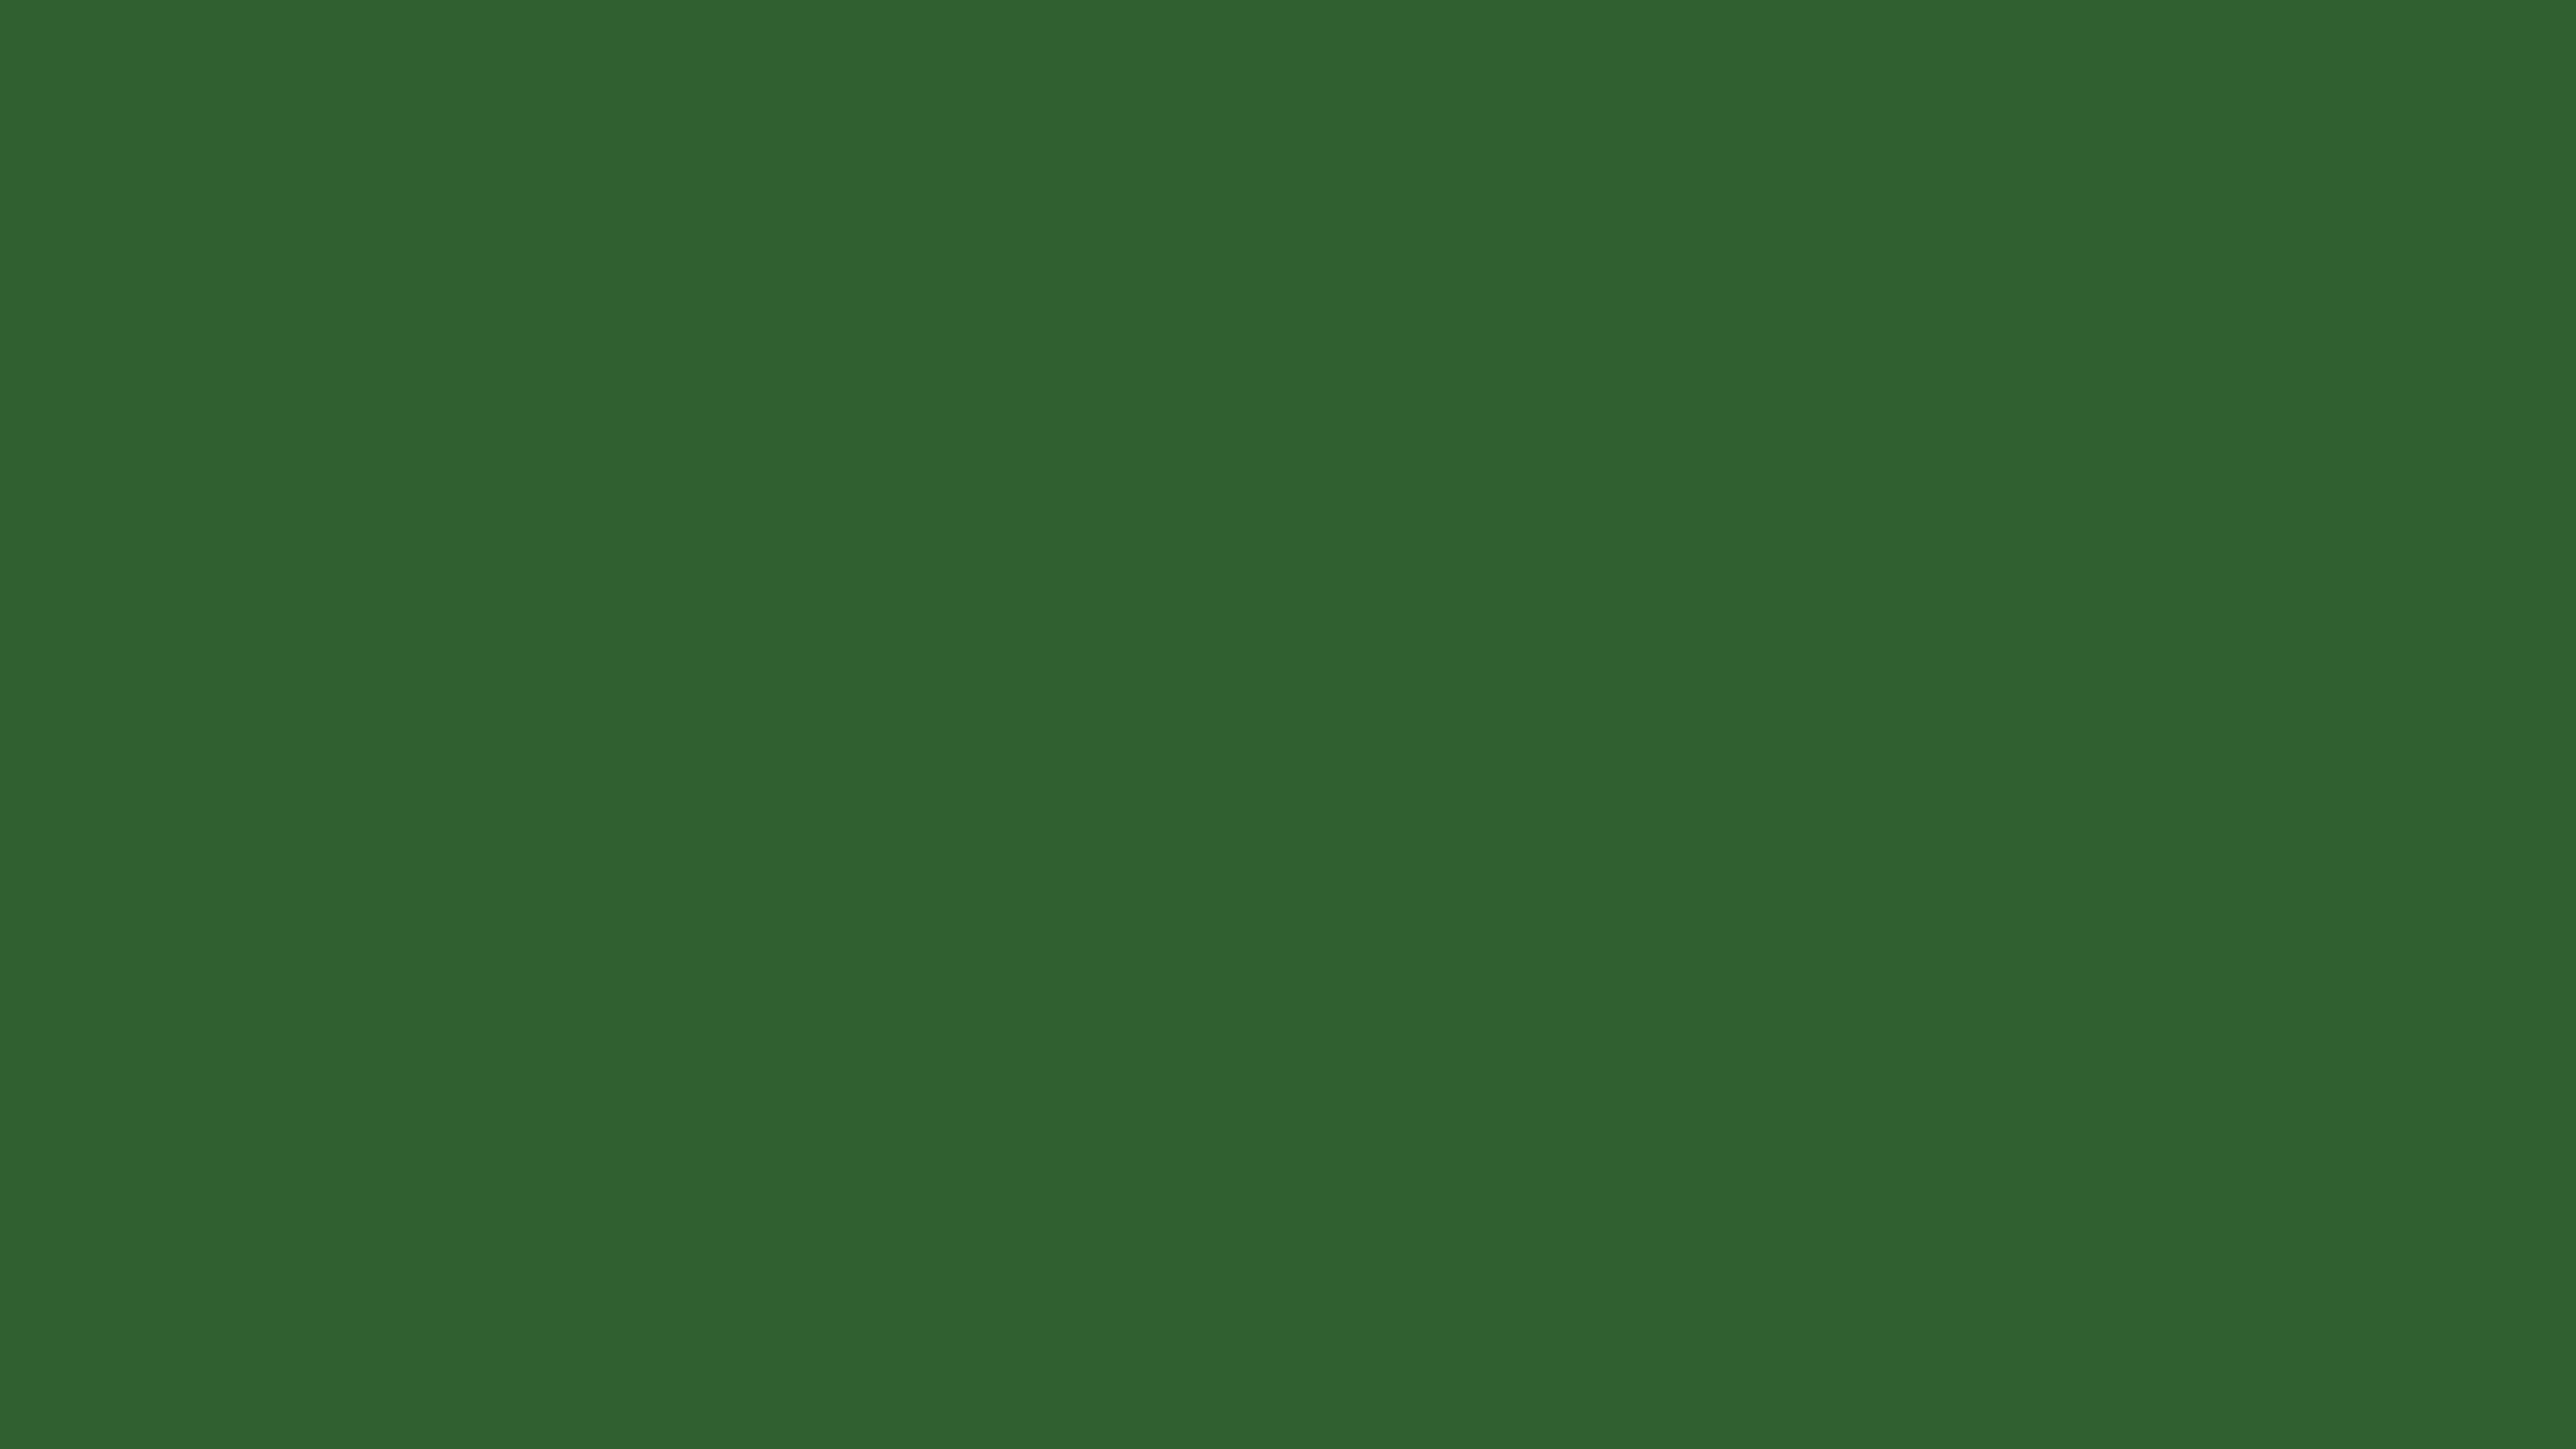 3840x2160 Mughal Green Solid Color Background